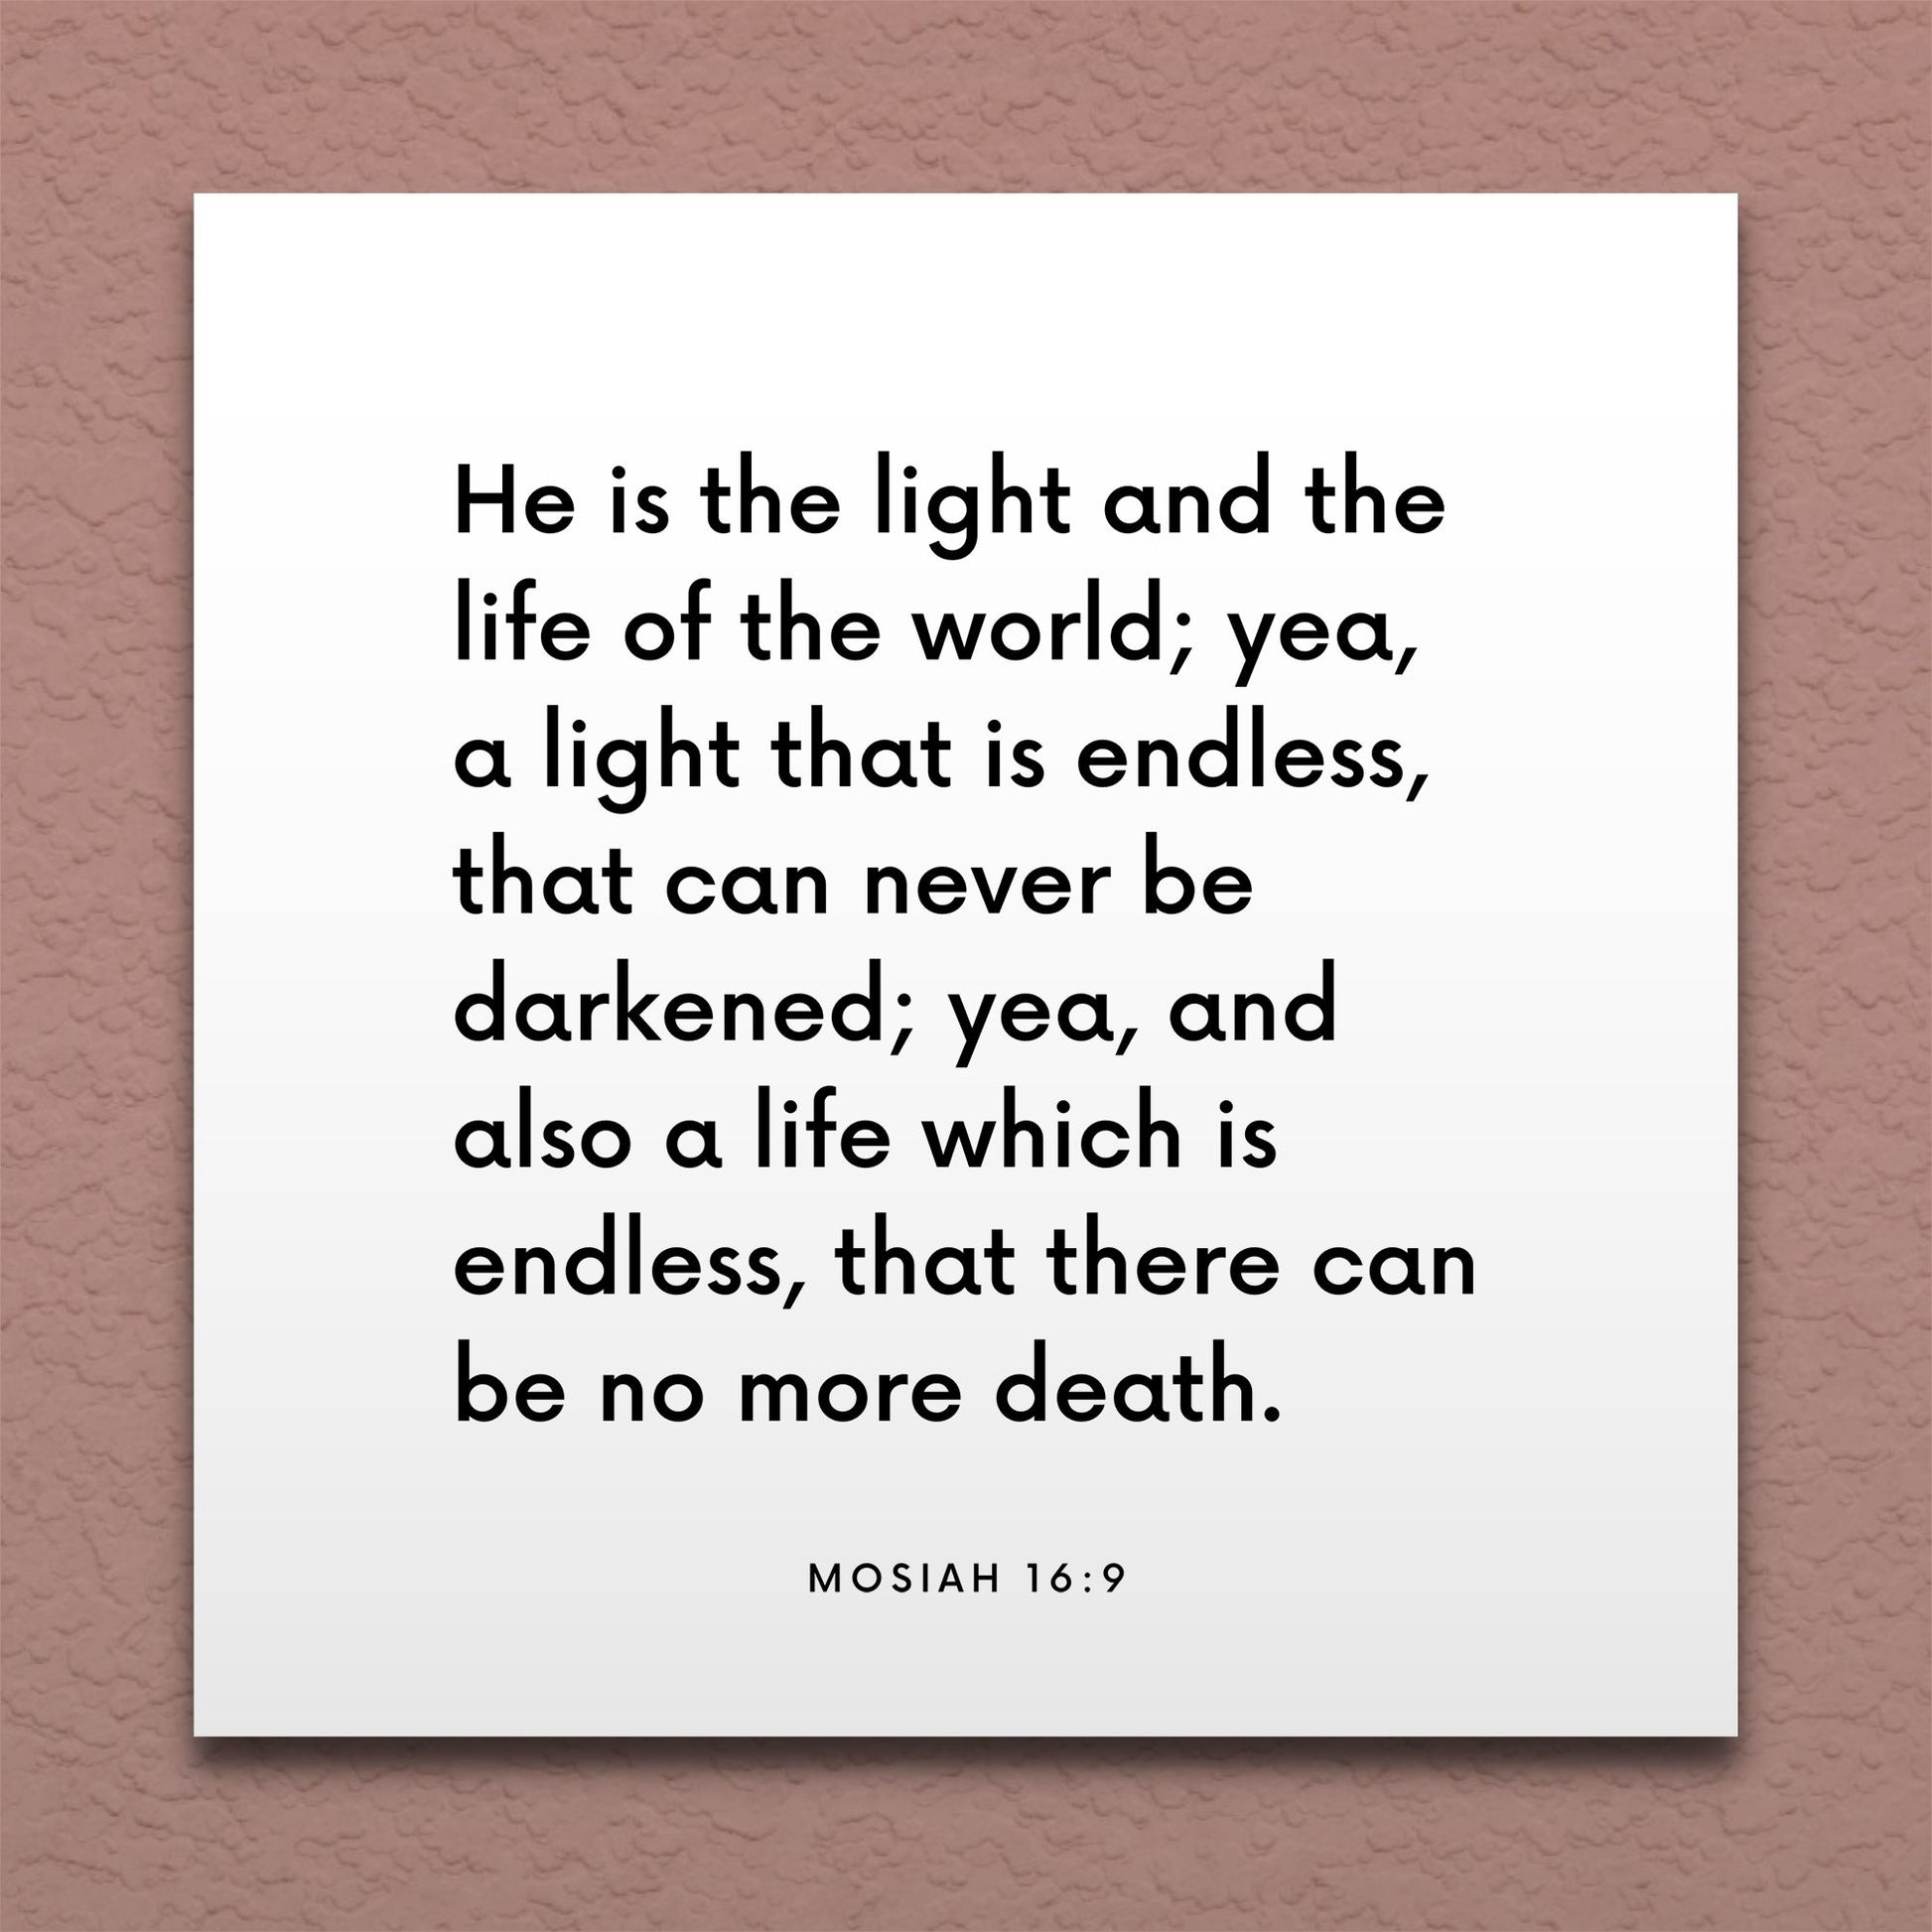 Wall-mounted scripture tile for Mosiah 16:9 - "He is the light and the life of the world"